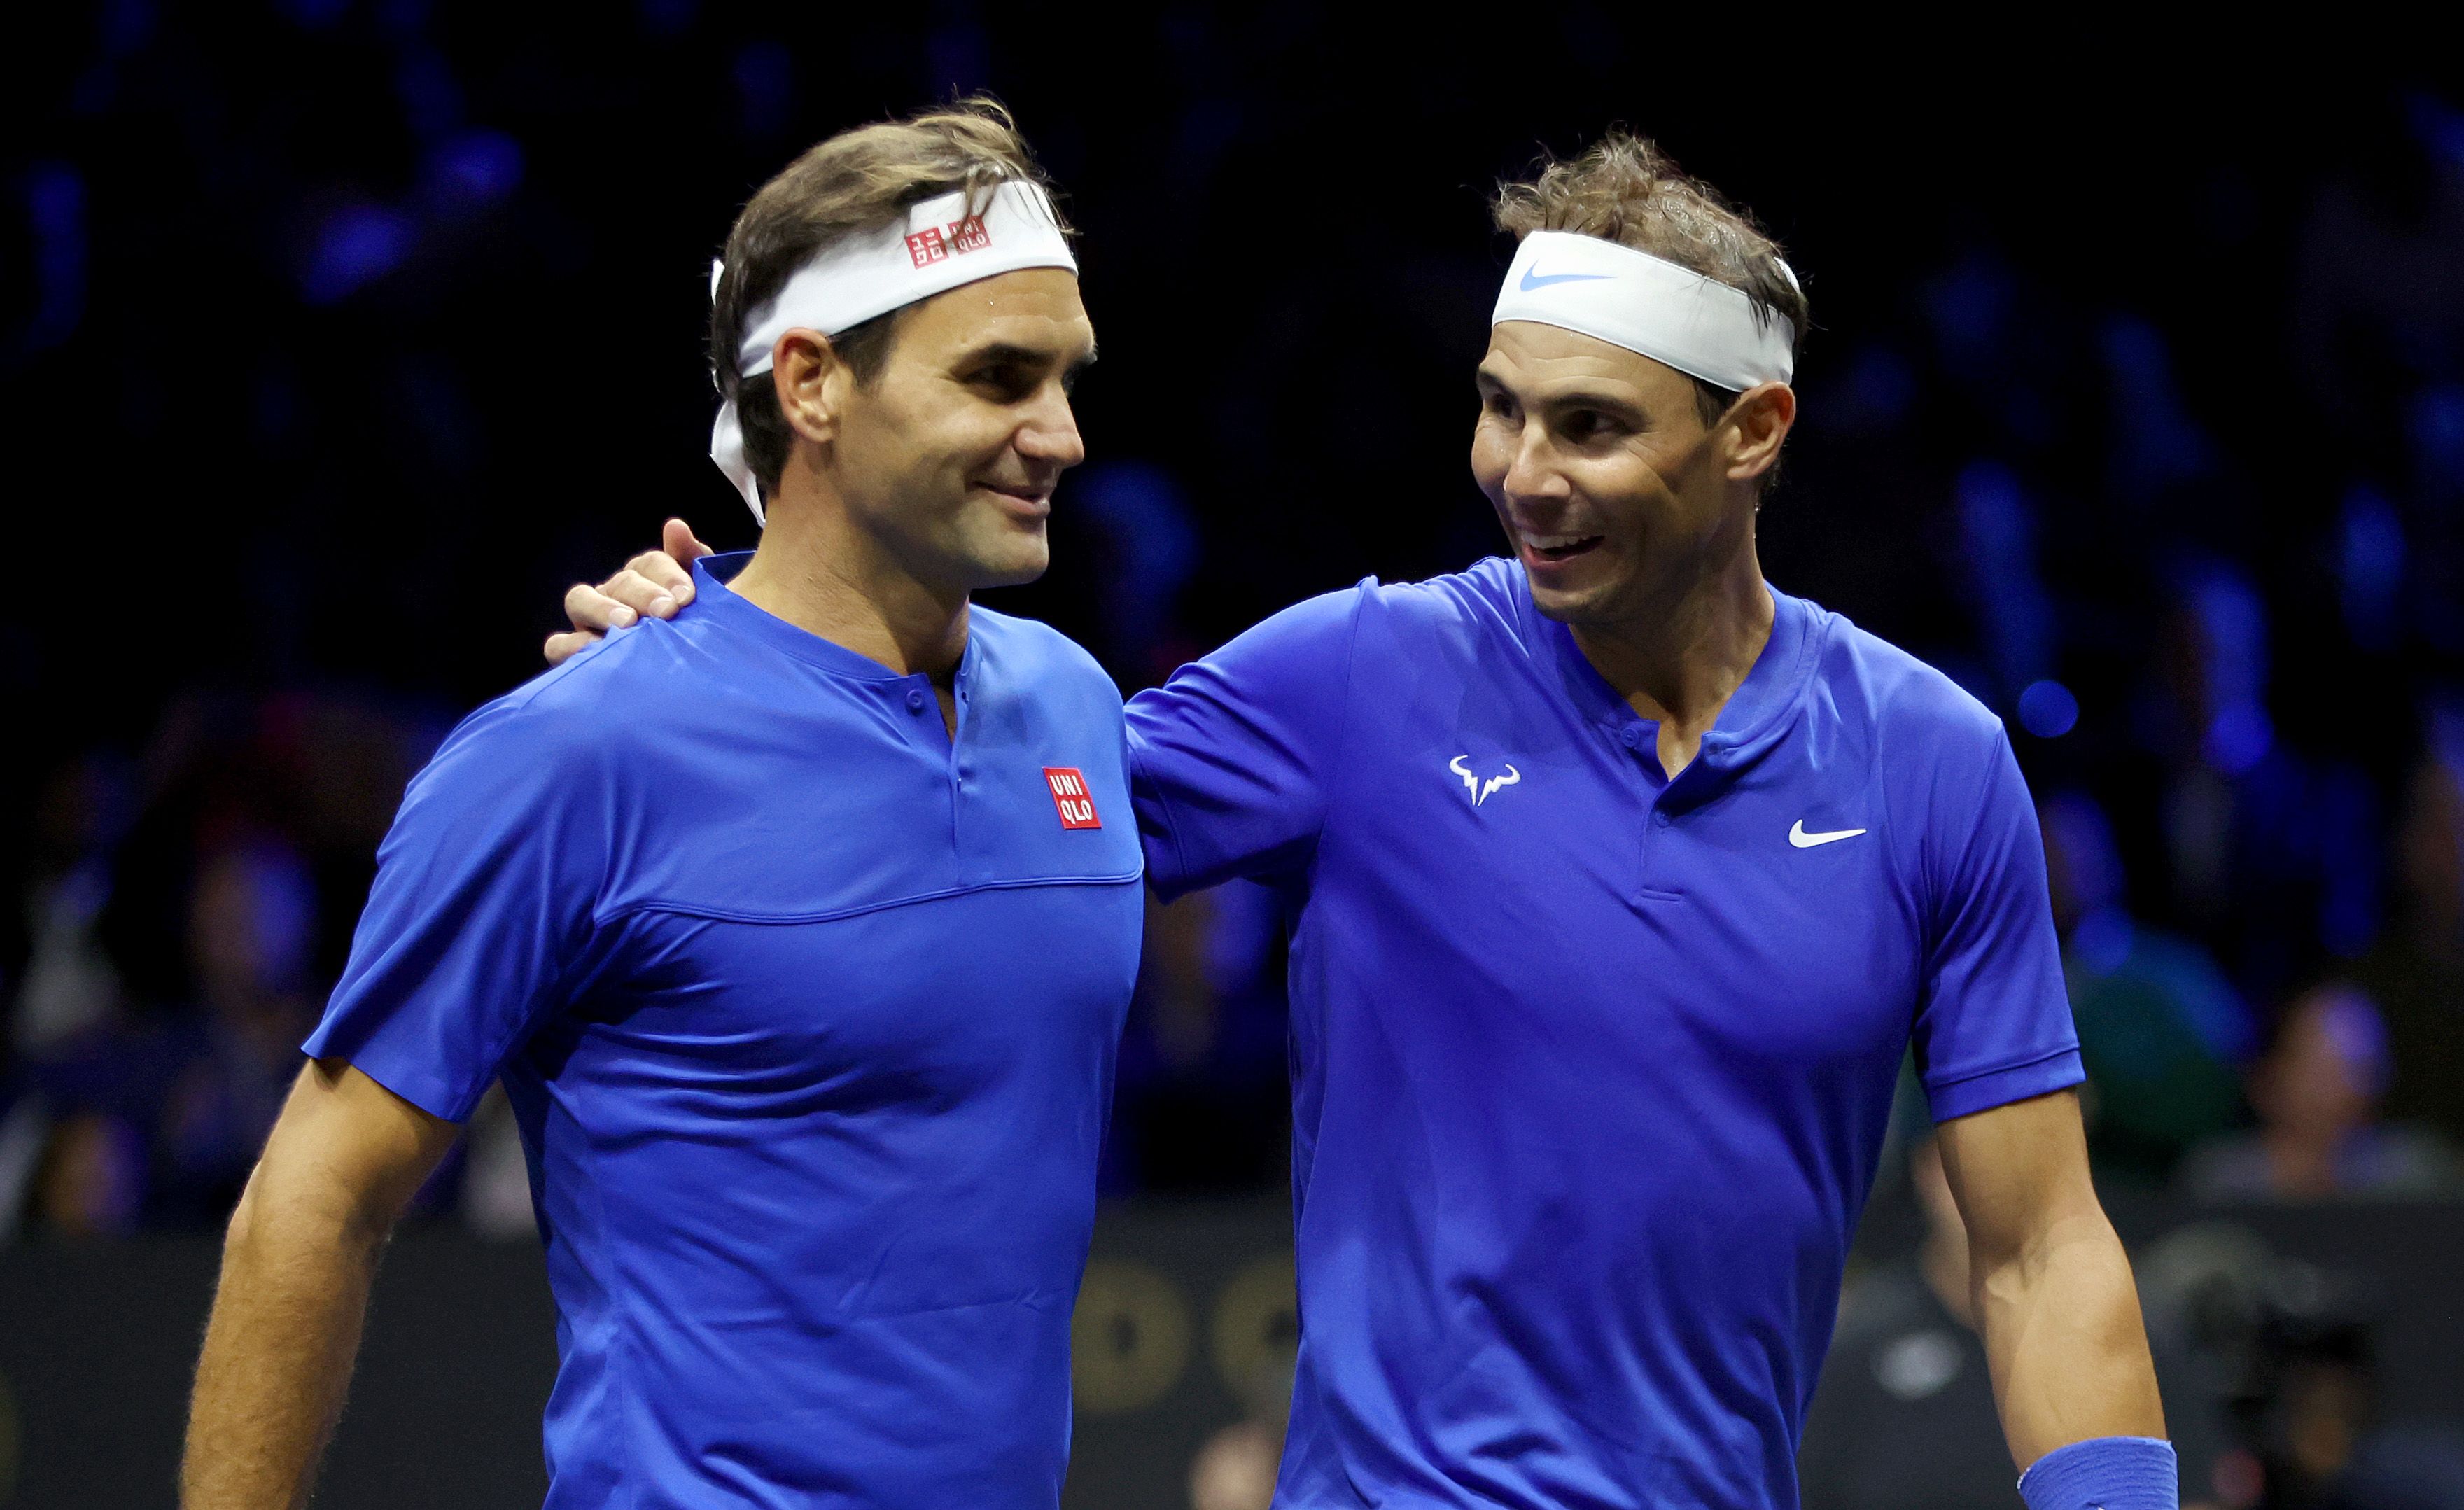 Rafael Nadal says 'a part of his life left' when Roger Federer retired